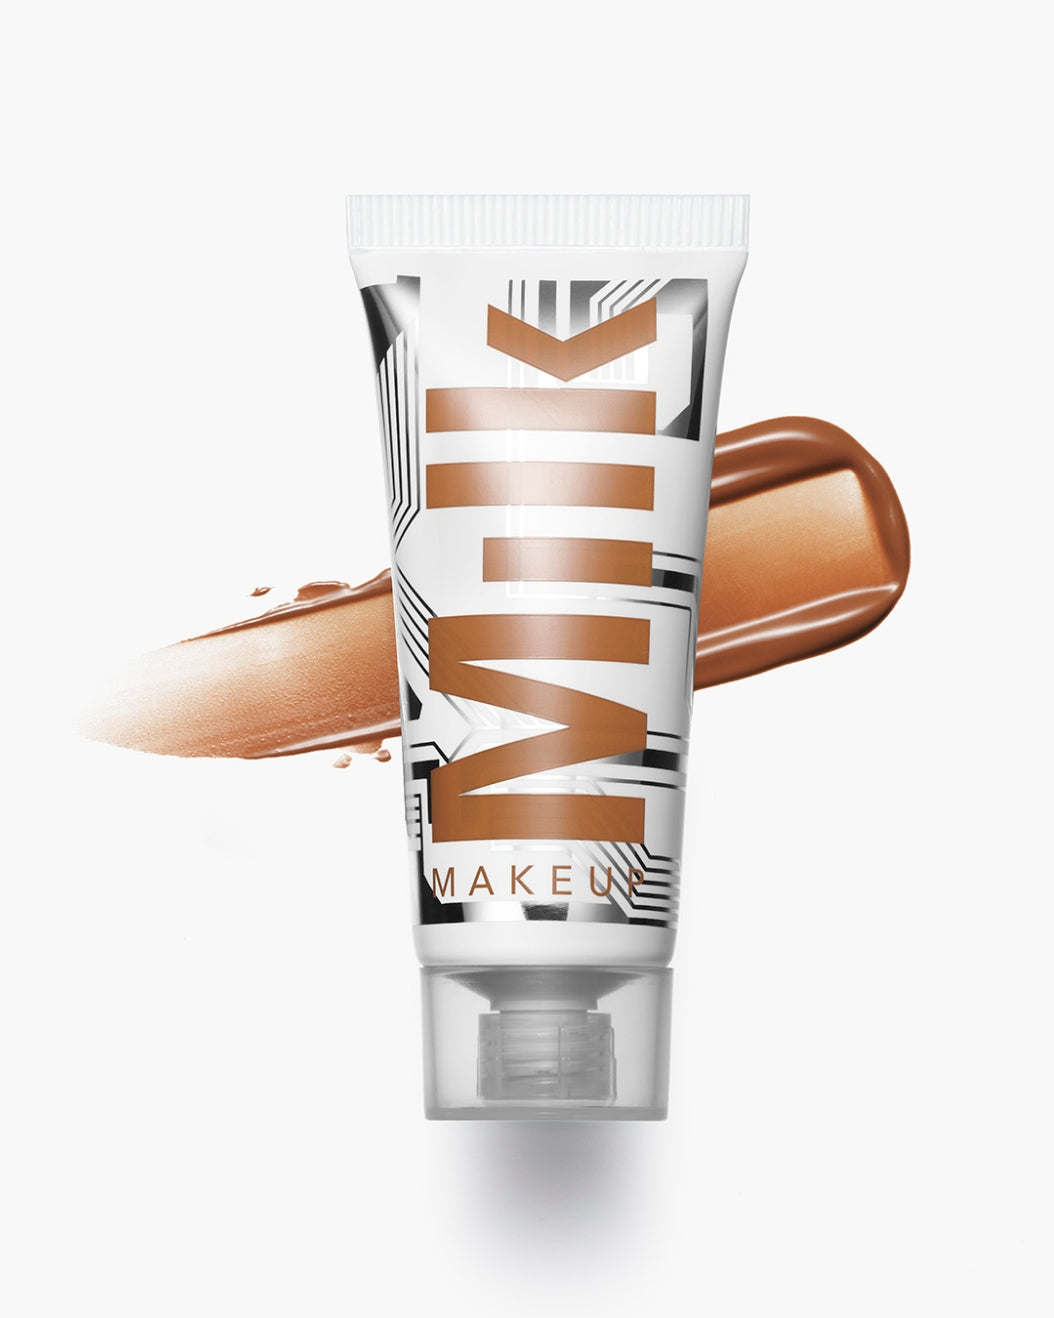 Product shot of a tube of Milk Makeup Bionic Bronzer in Time Travel with a swipe of the product behind it against a white background